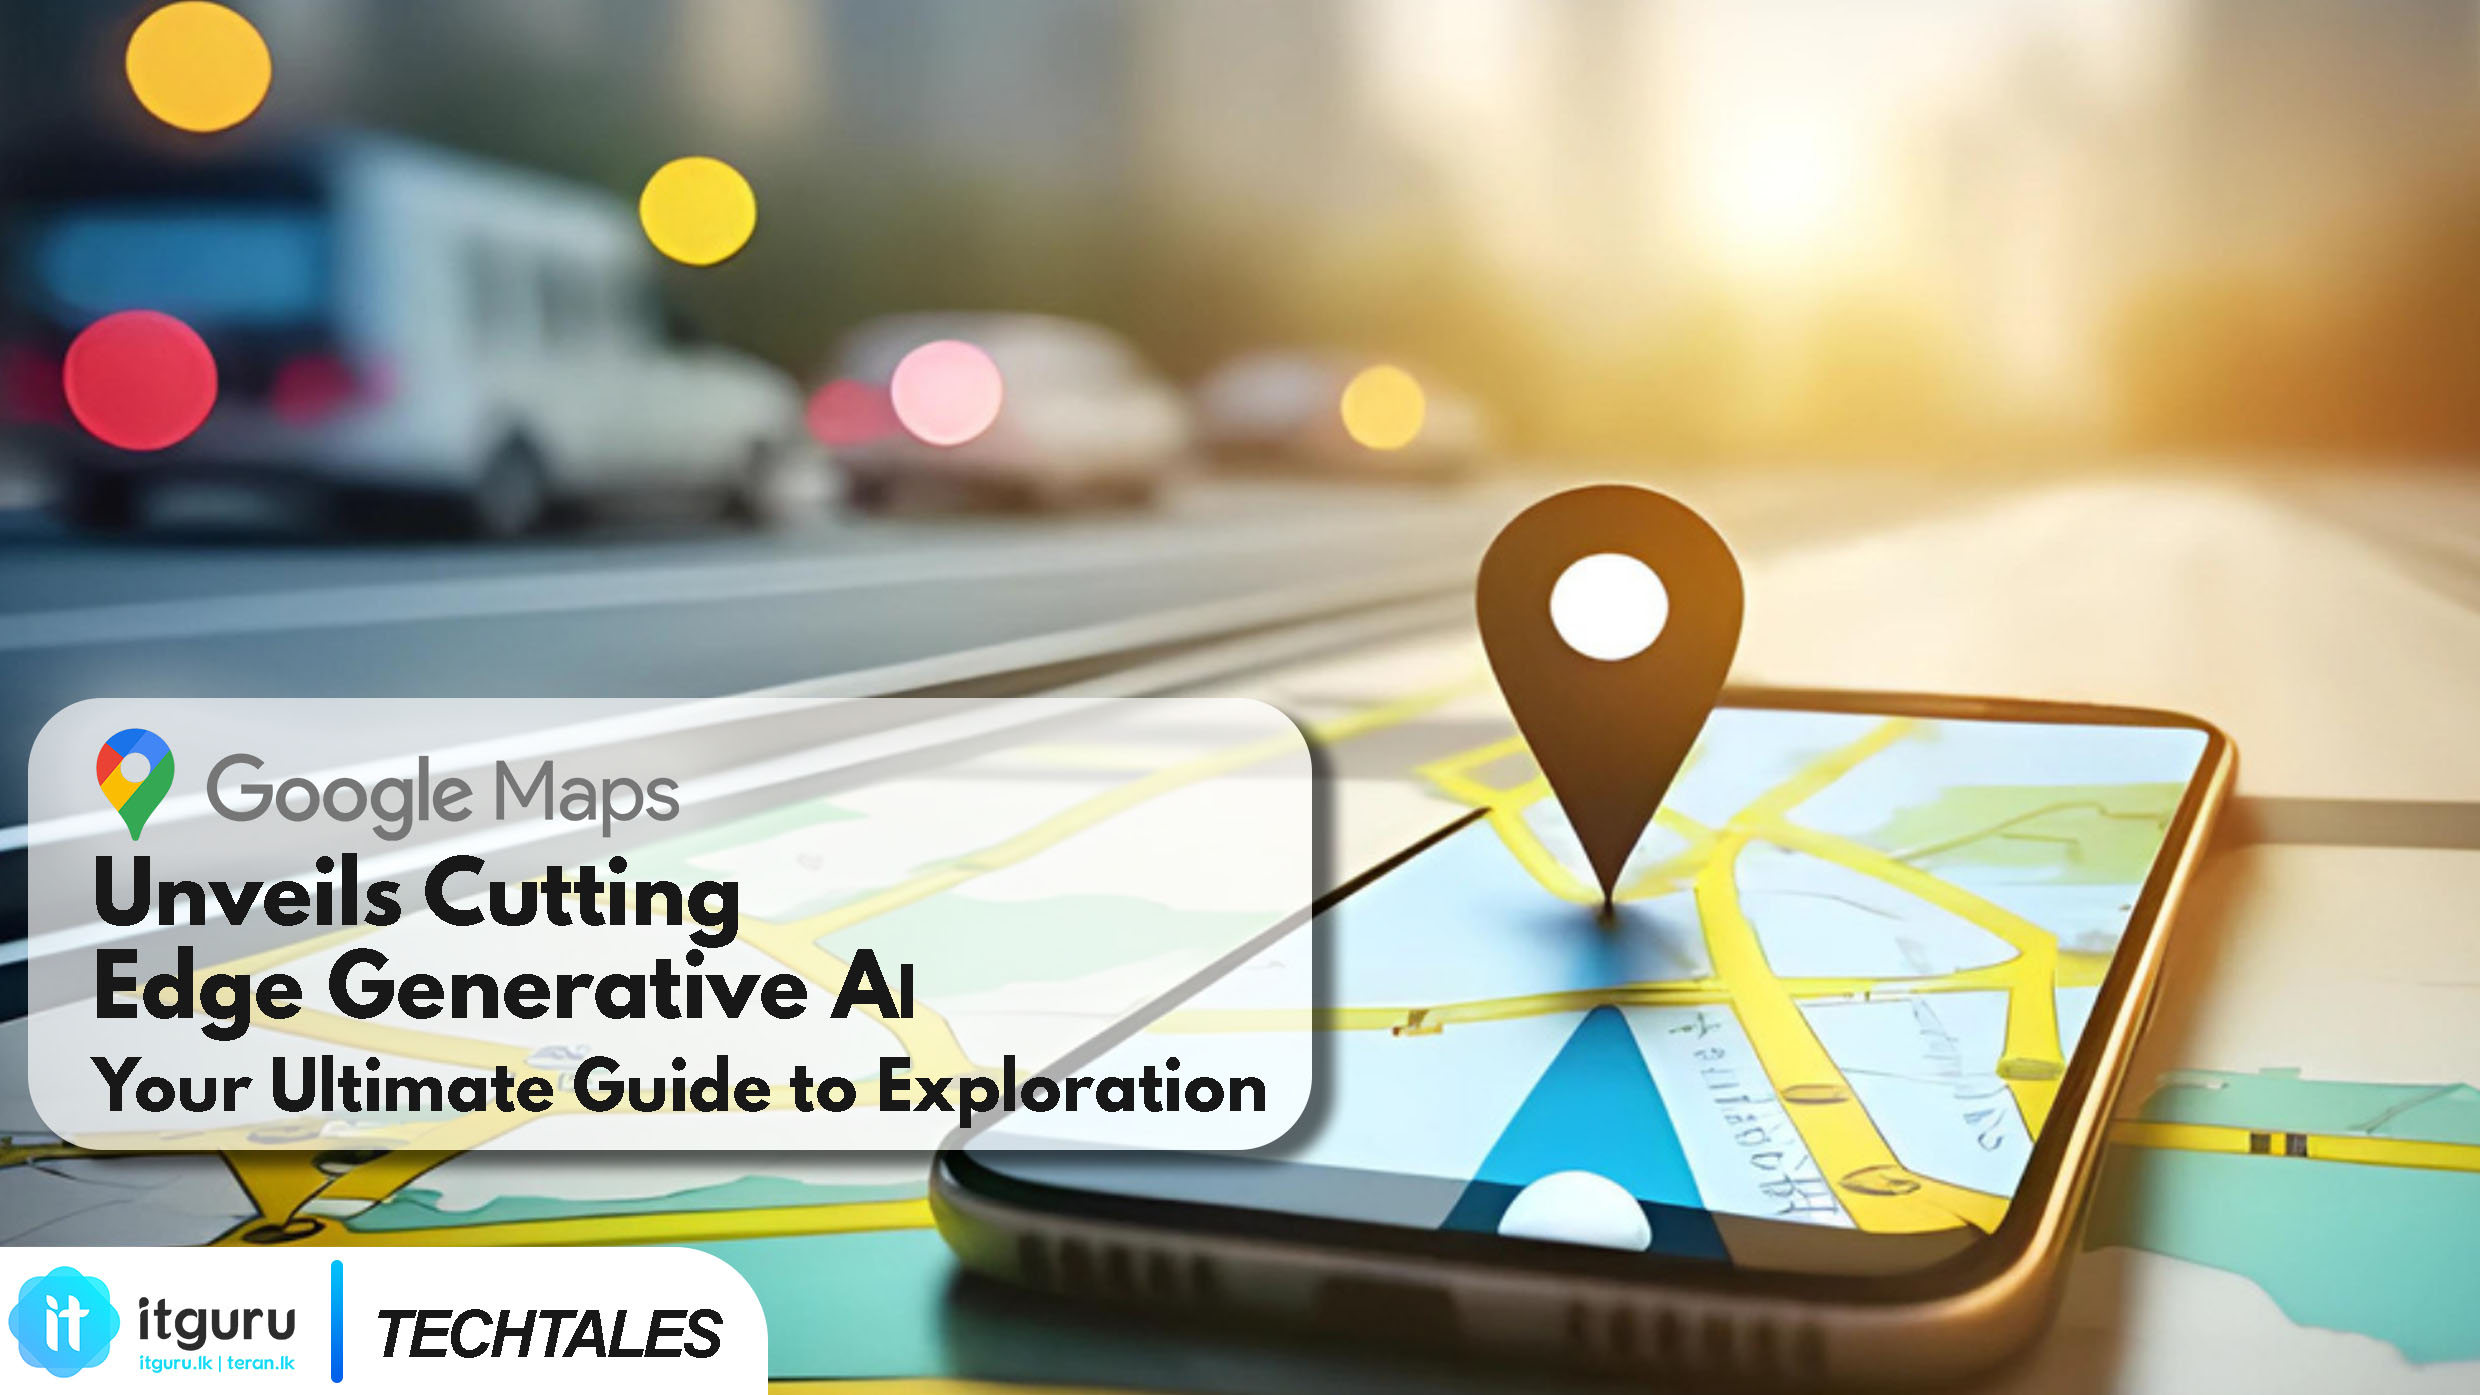 Google Maps Unveils Cutting-Edge Generative AI: Your Ultimate Guide to Exploration